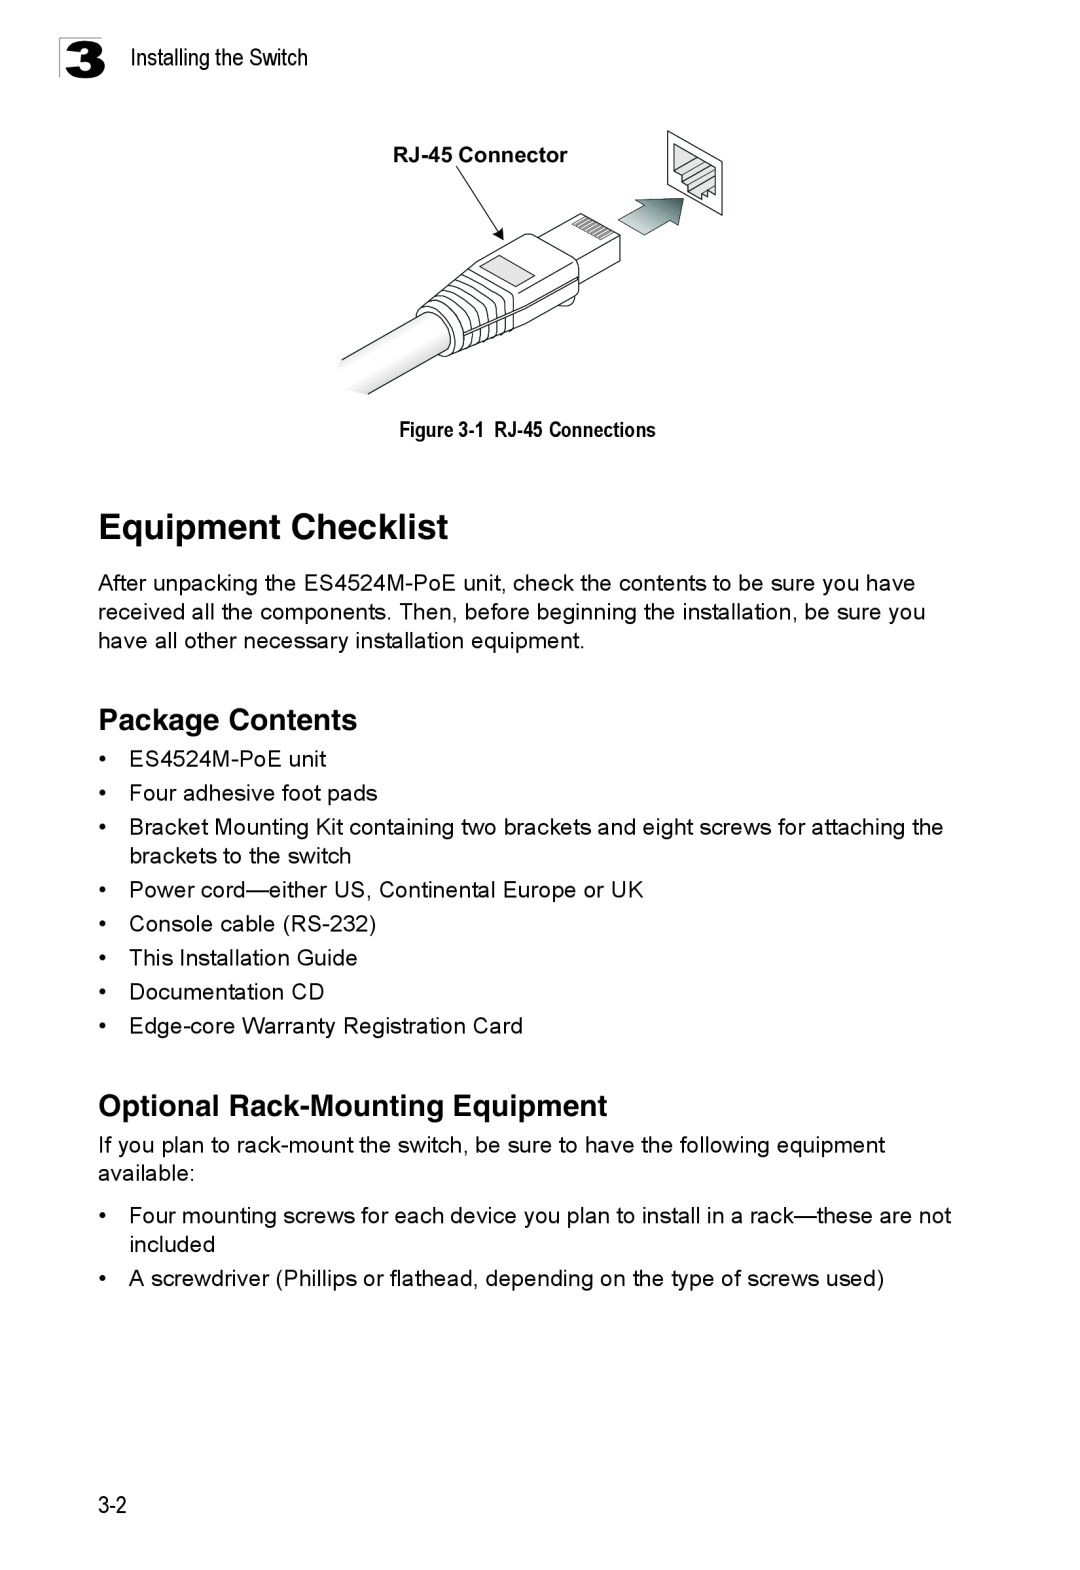 Accton Technology ES4524M-POE manual Equipment Checklist, Package Contents, Optional Rack-Mounting Equipment 